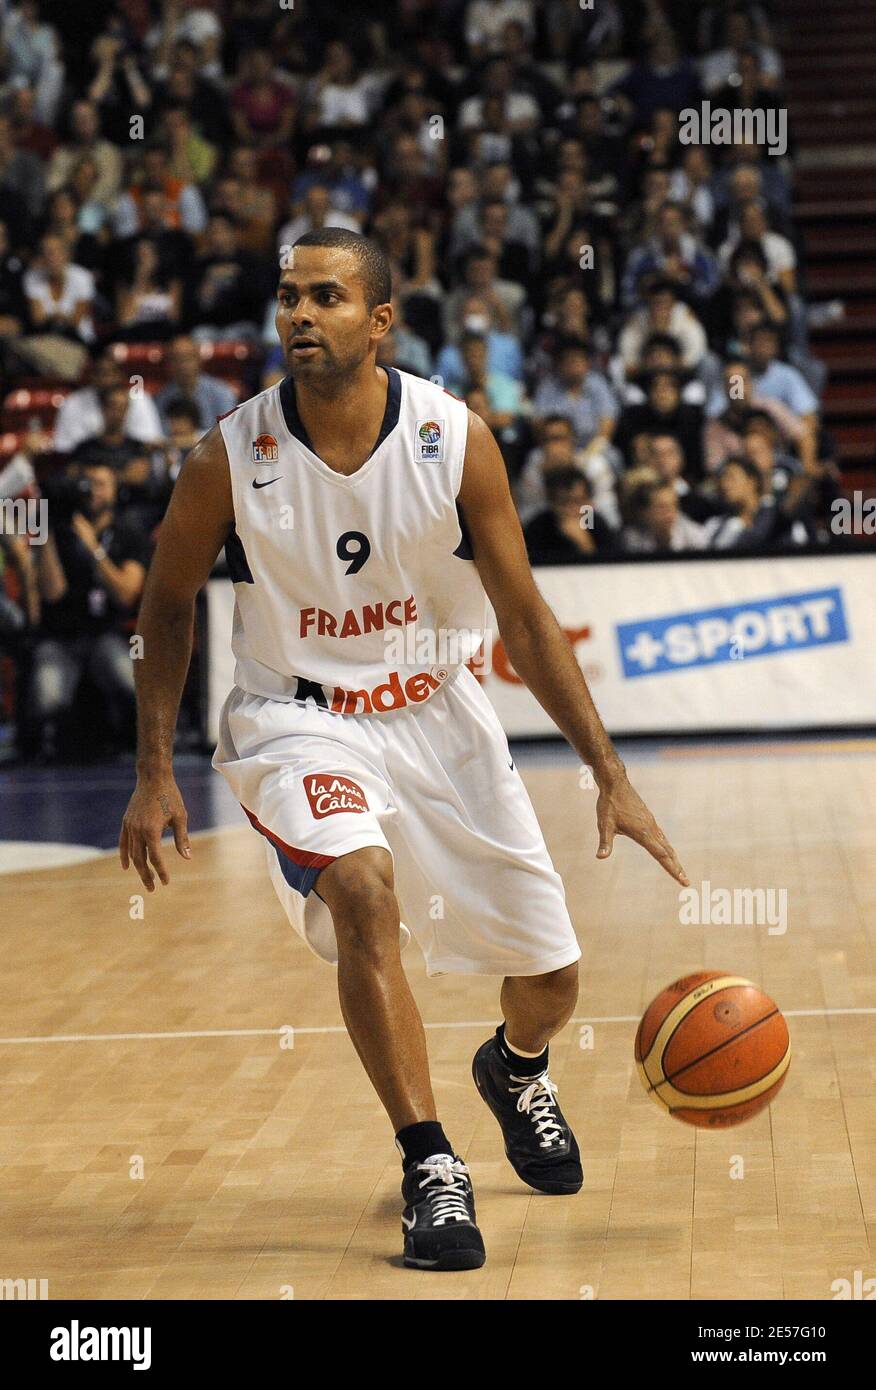 The French basketball player Tony Parker during the Euro Basket qualifying  game, France vs Ukraina in